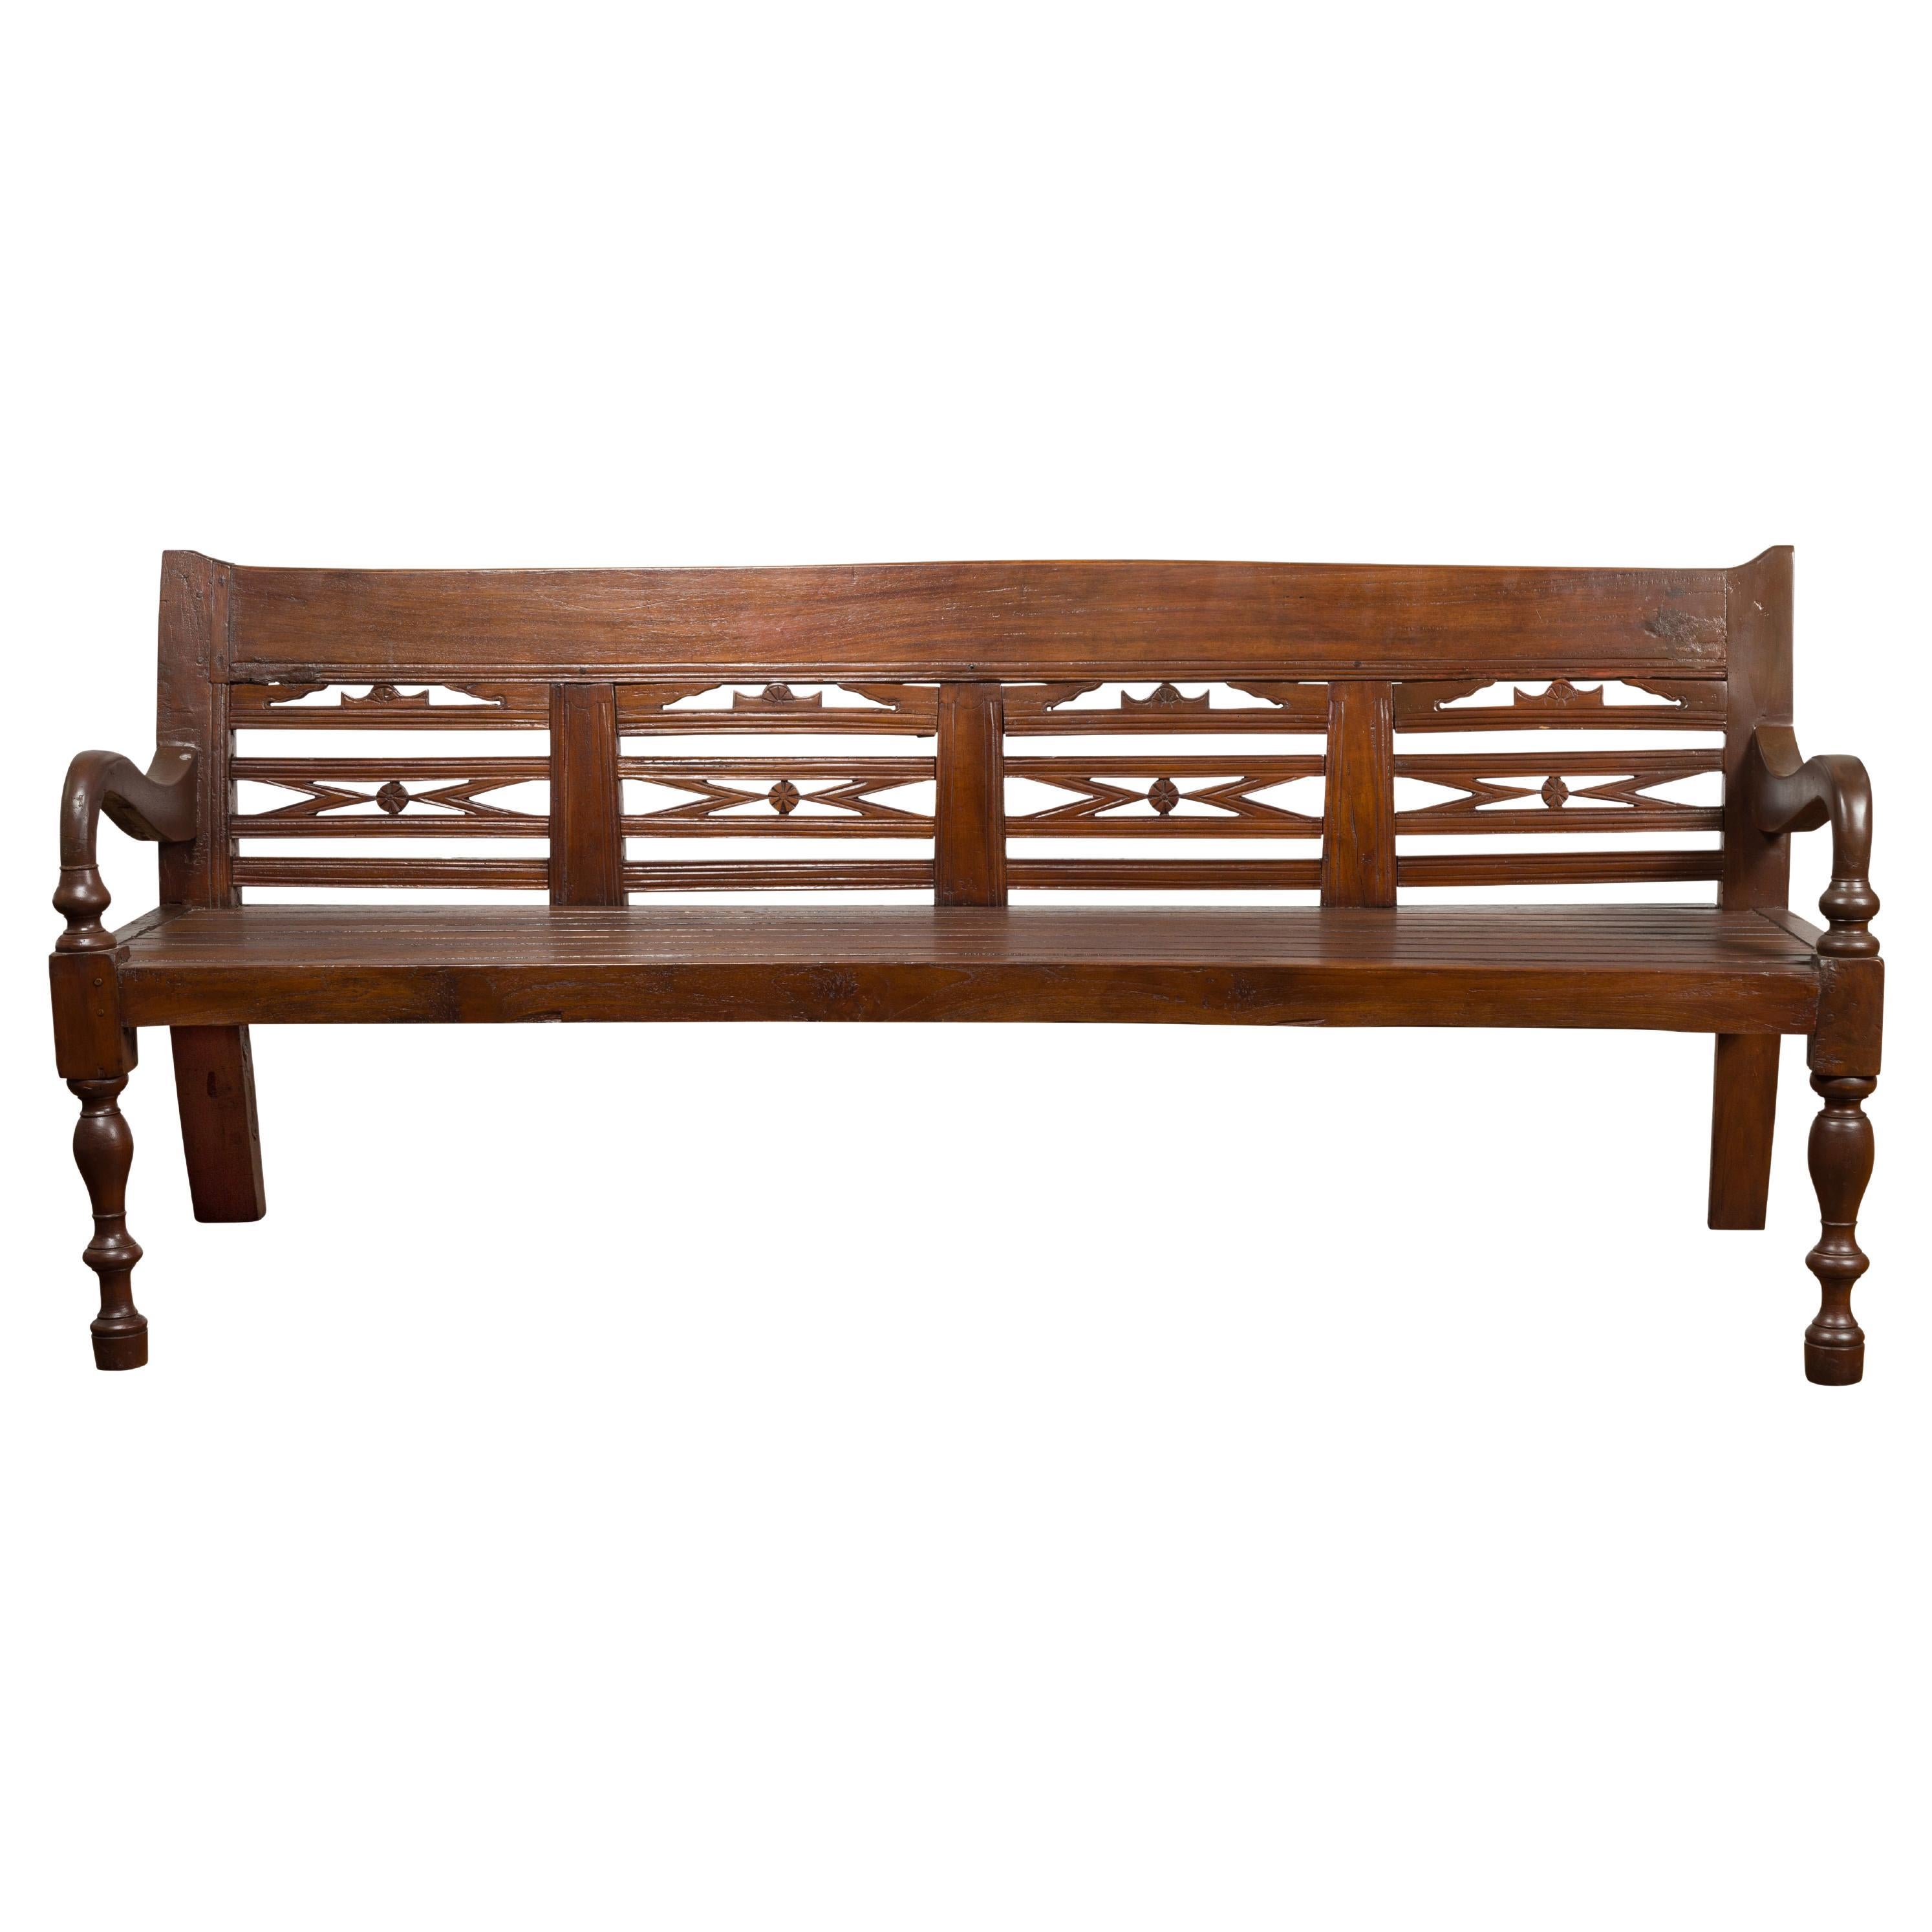 Antique Teak Wood Javanese Settee with Hand-Carved Back and Scrolling Arms For Sale